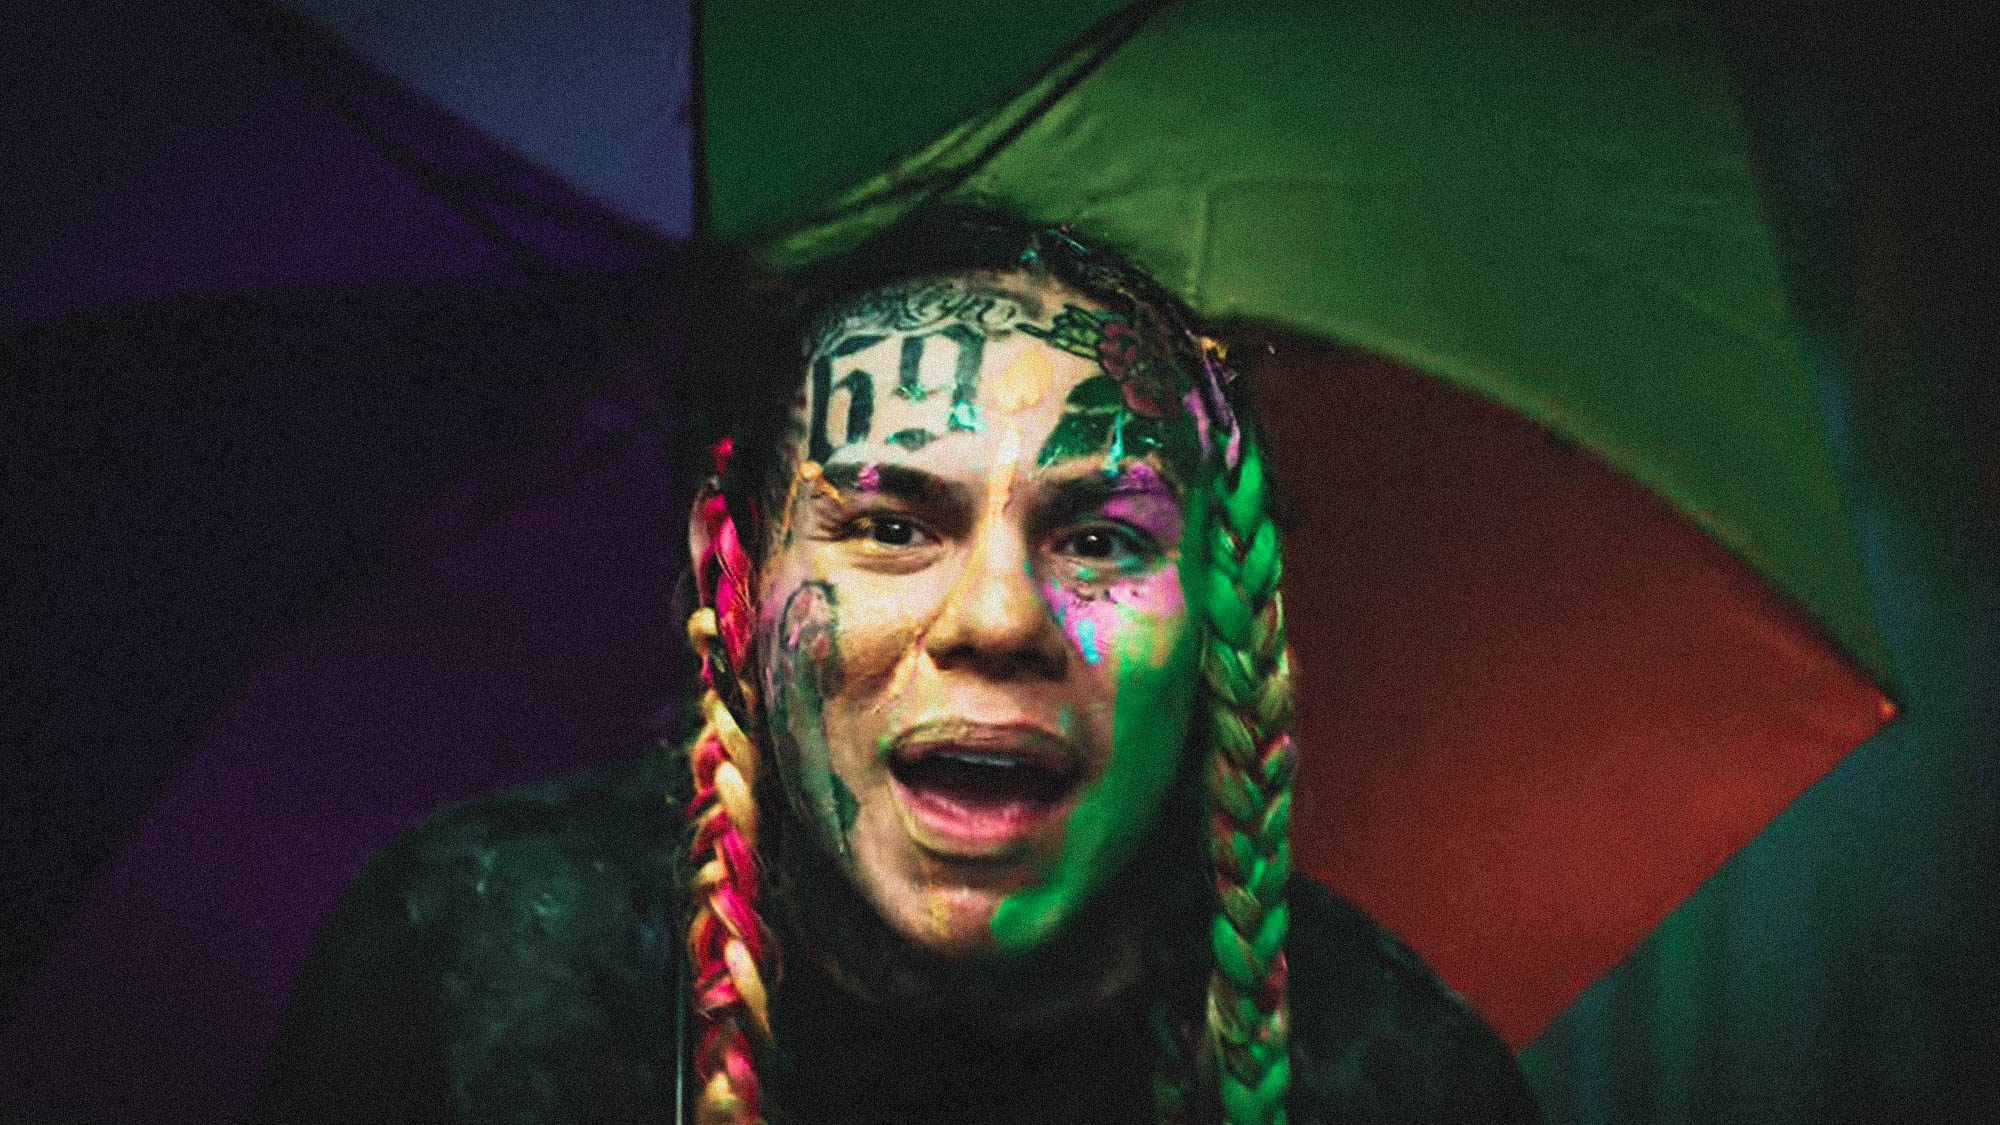 6ix9ine is being sued by a promoter for allegedly taking payment for a no-show concert in Texas